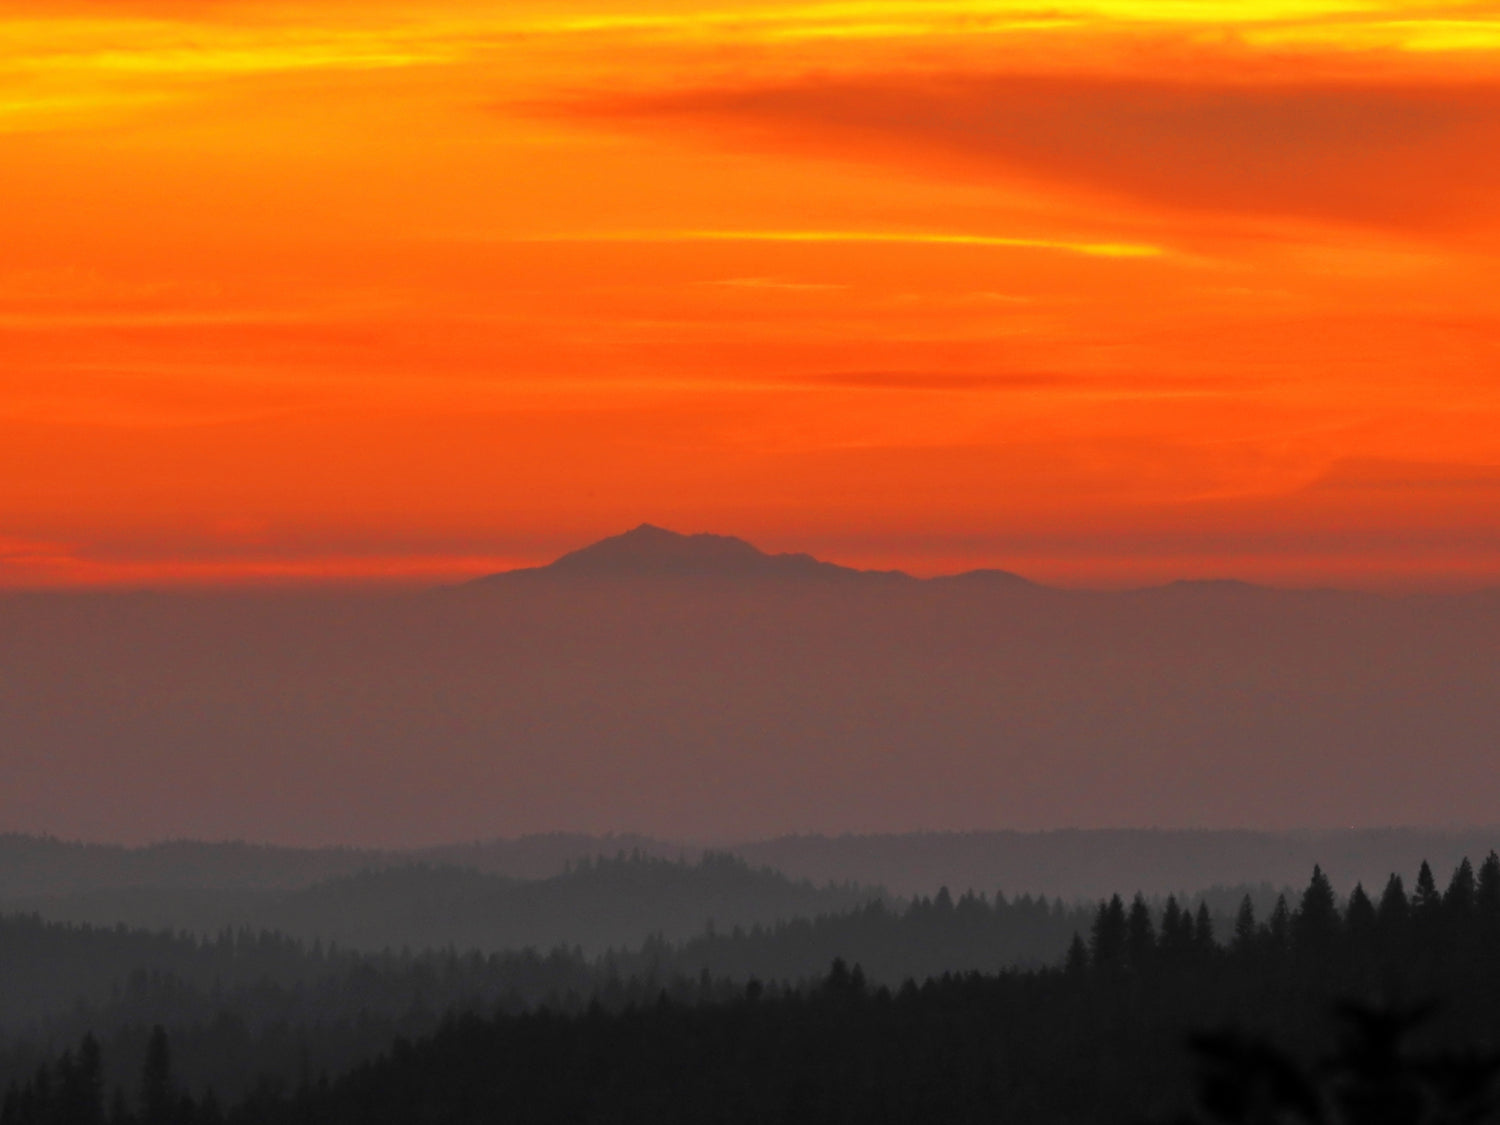 Solaced by a mountain sunrise or sunset, forest trees on the horizon, orange and yellow hues